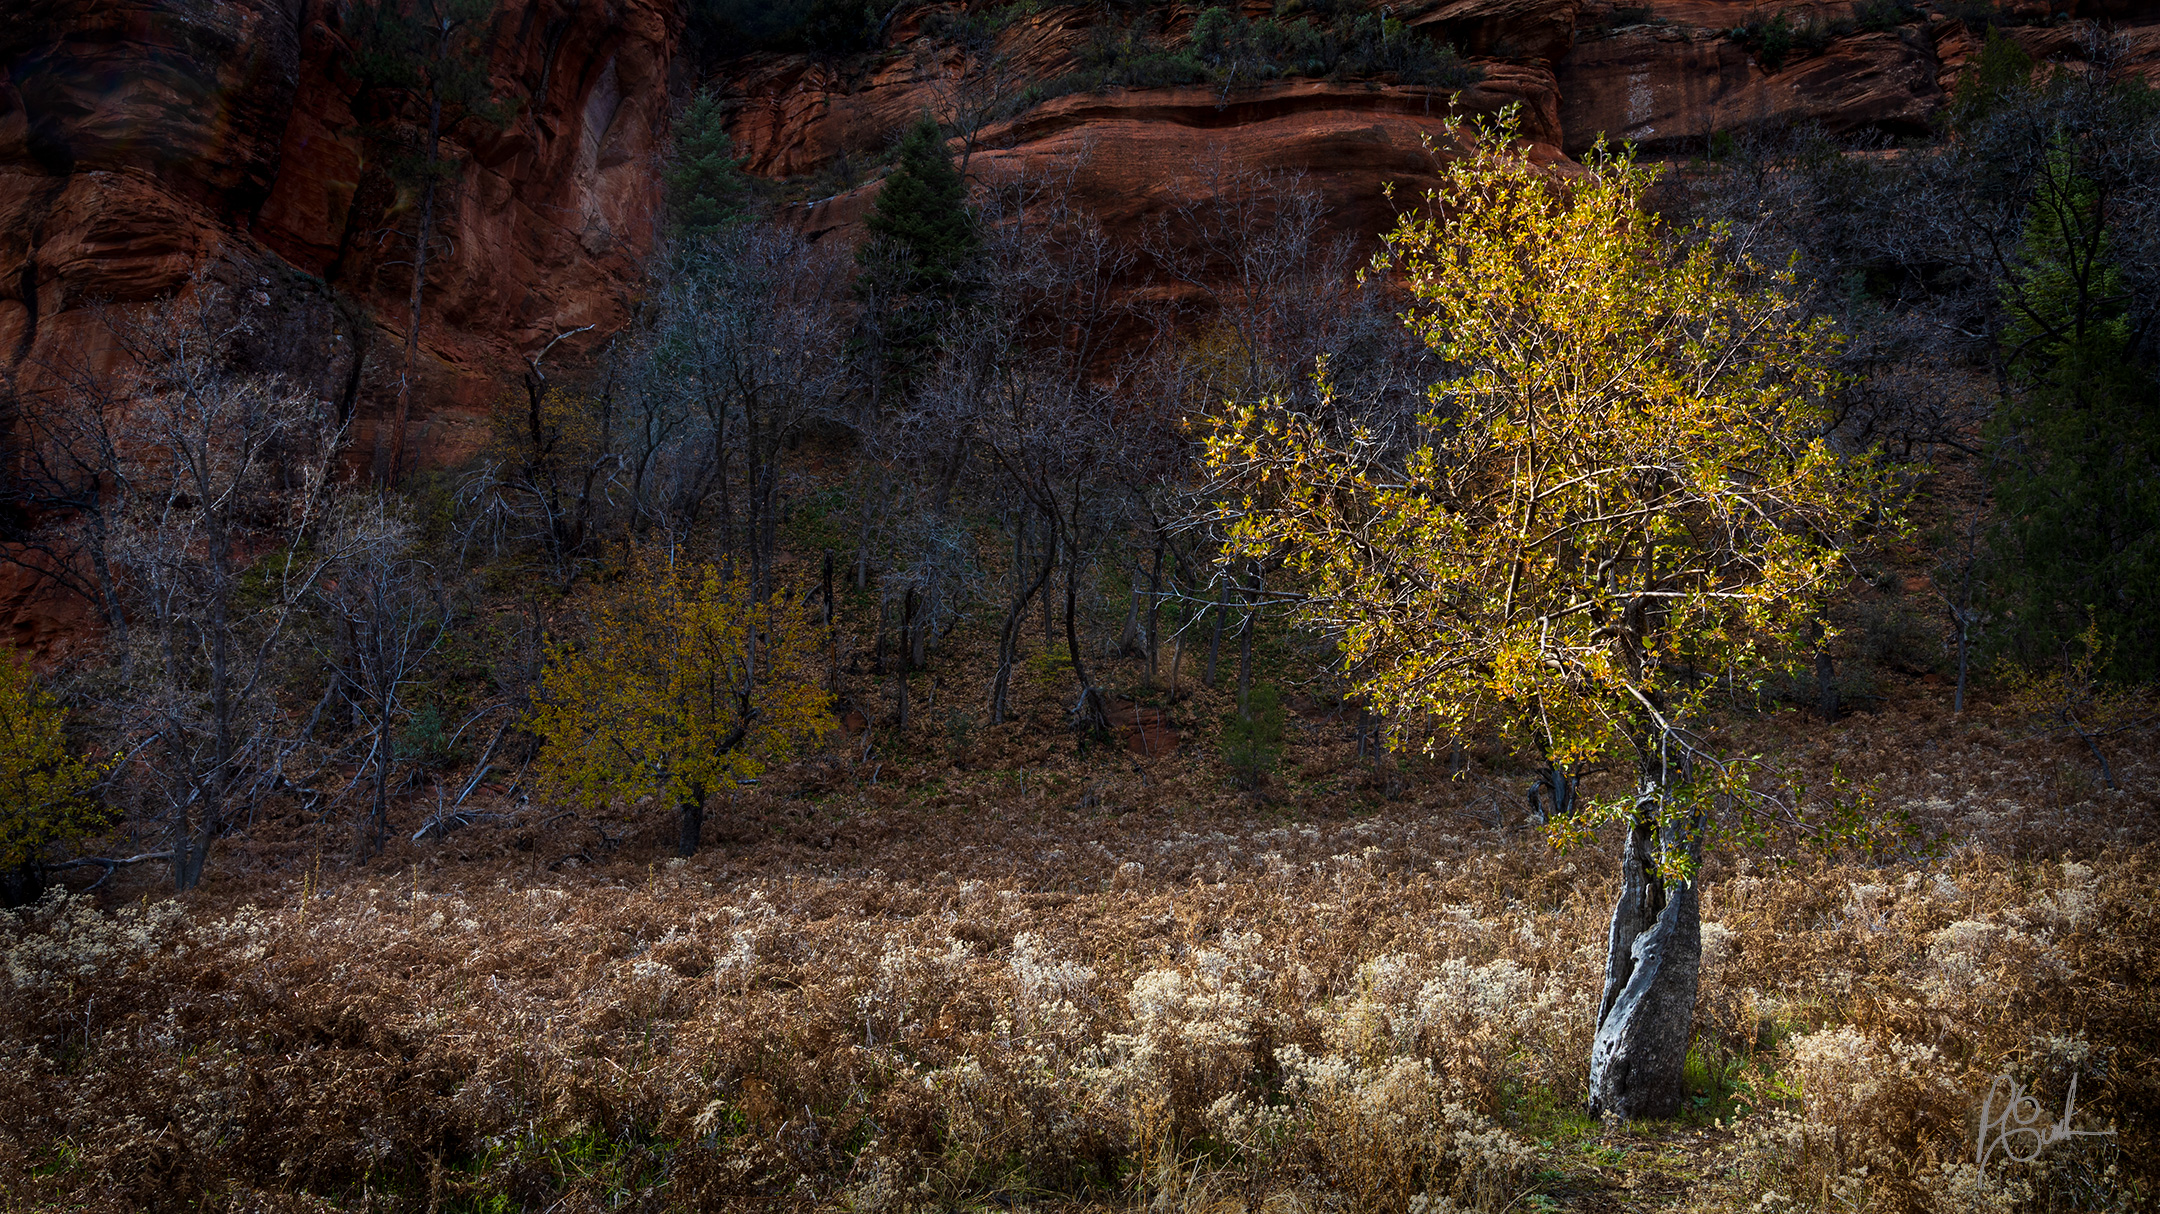 A golden tree is nourished by the Autumn sun in Sedona.